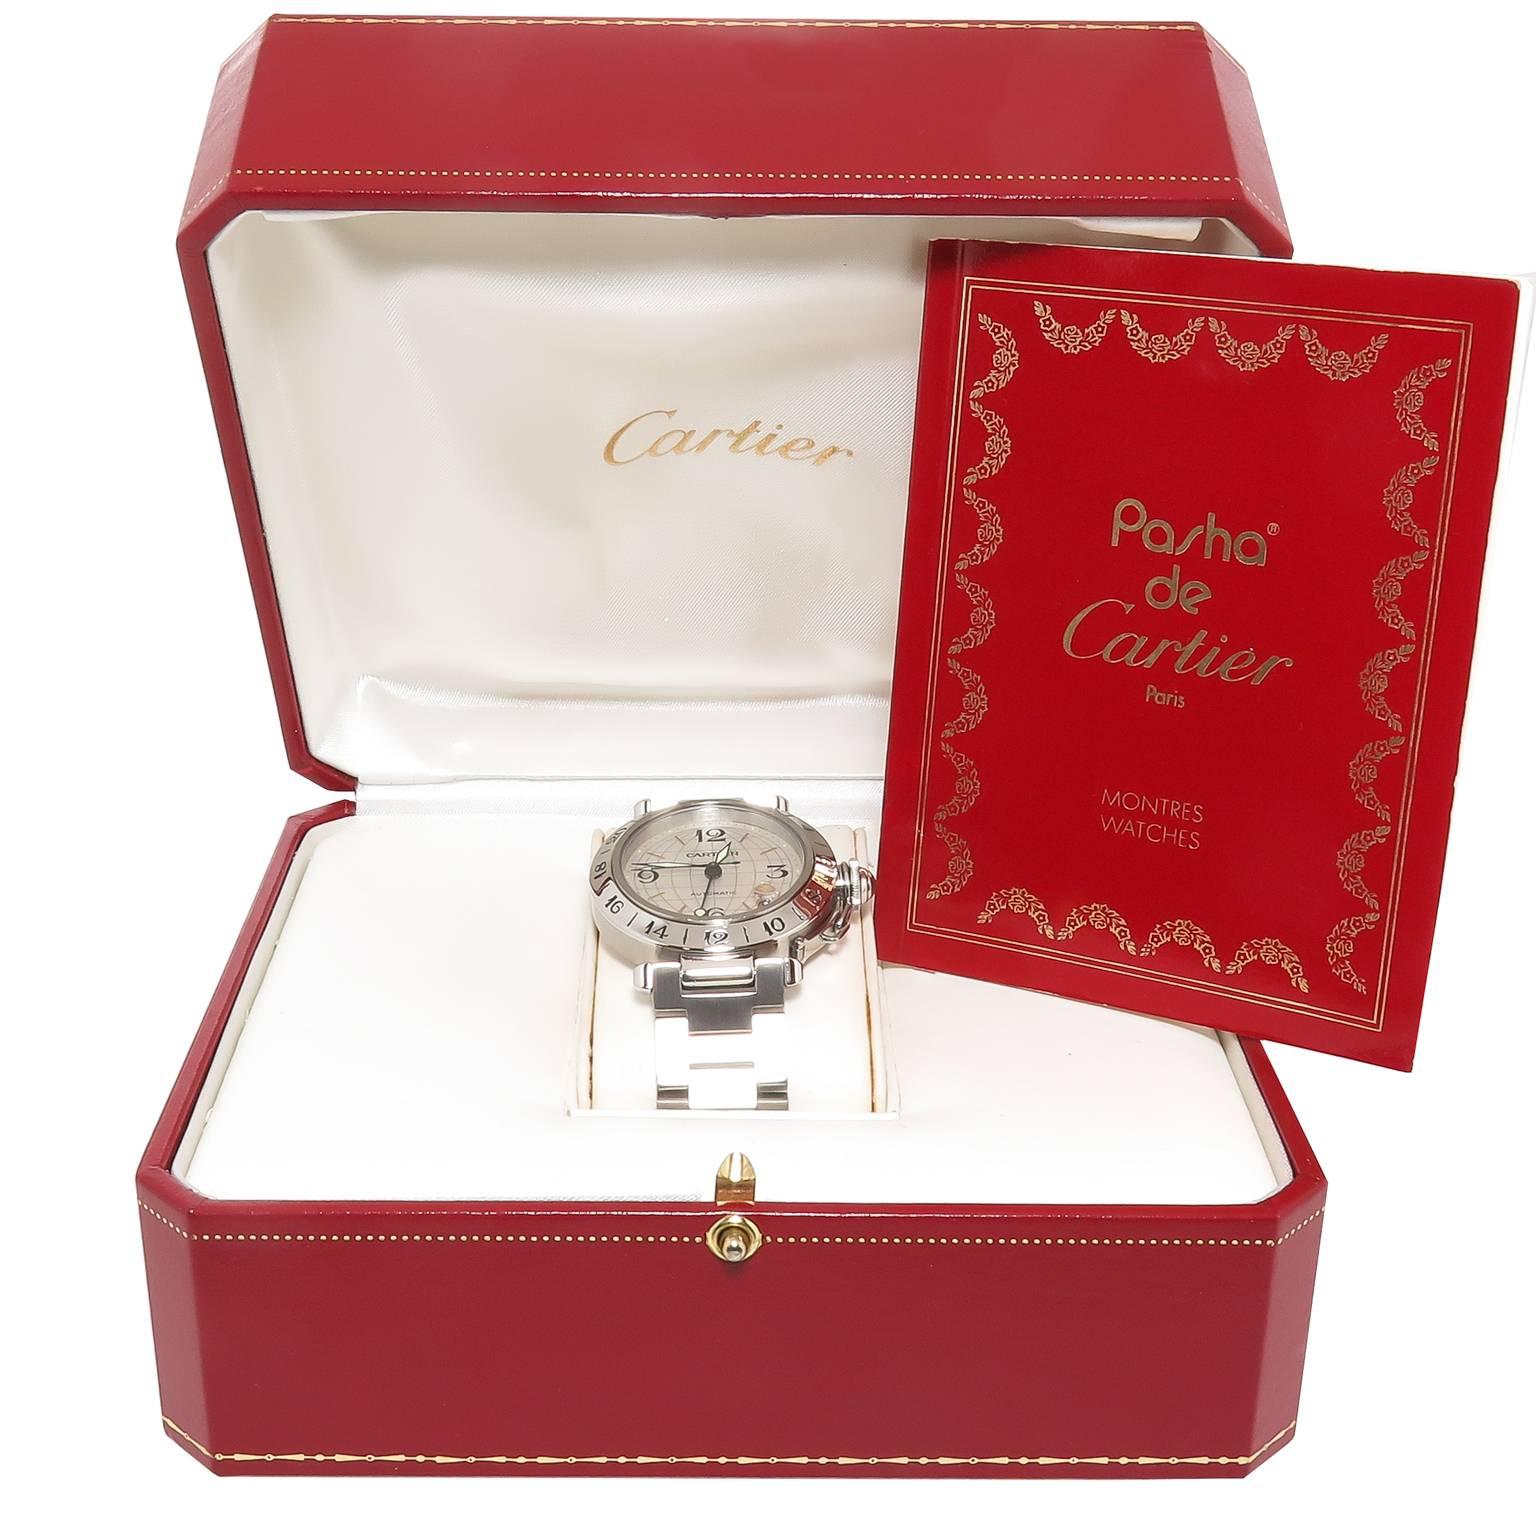 Cartier Stainless Steel Pasha C GMT Automatic Wristwatch 1